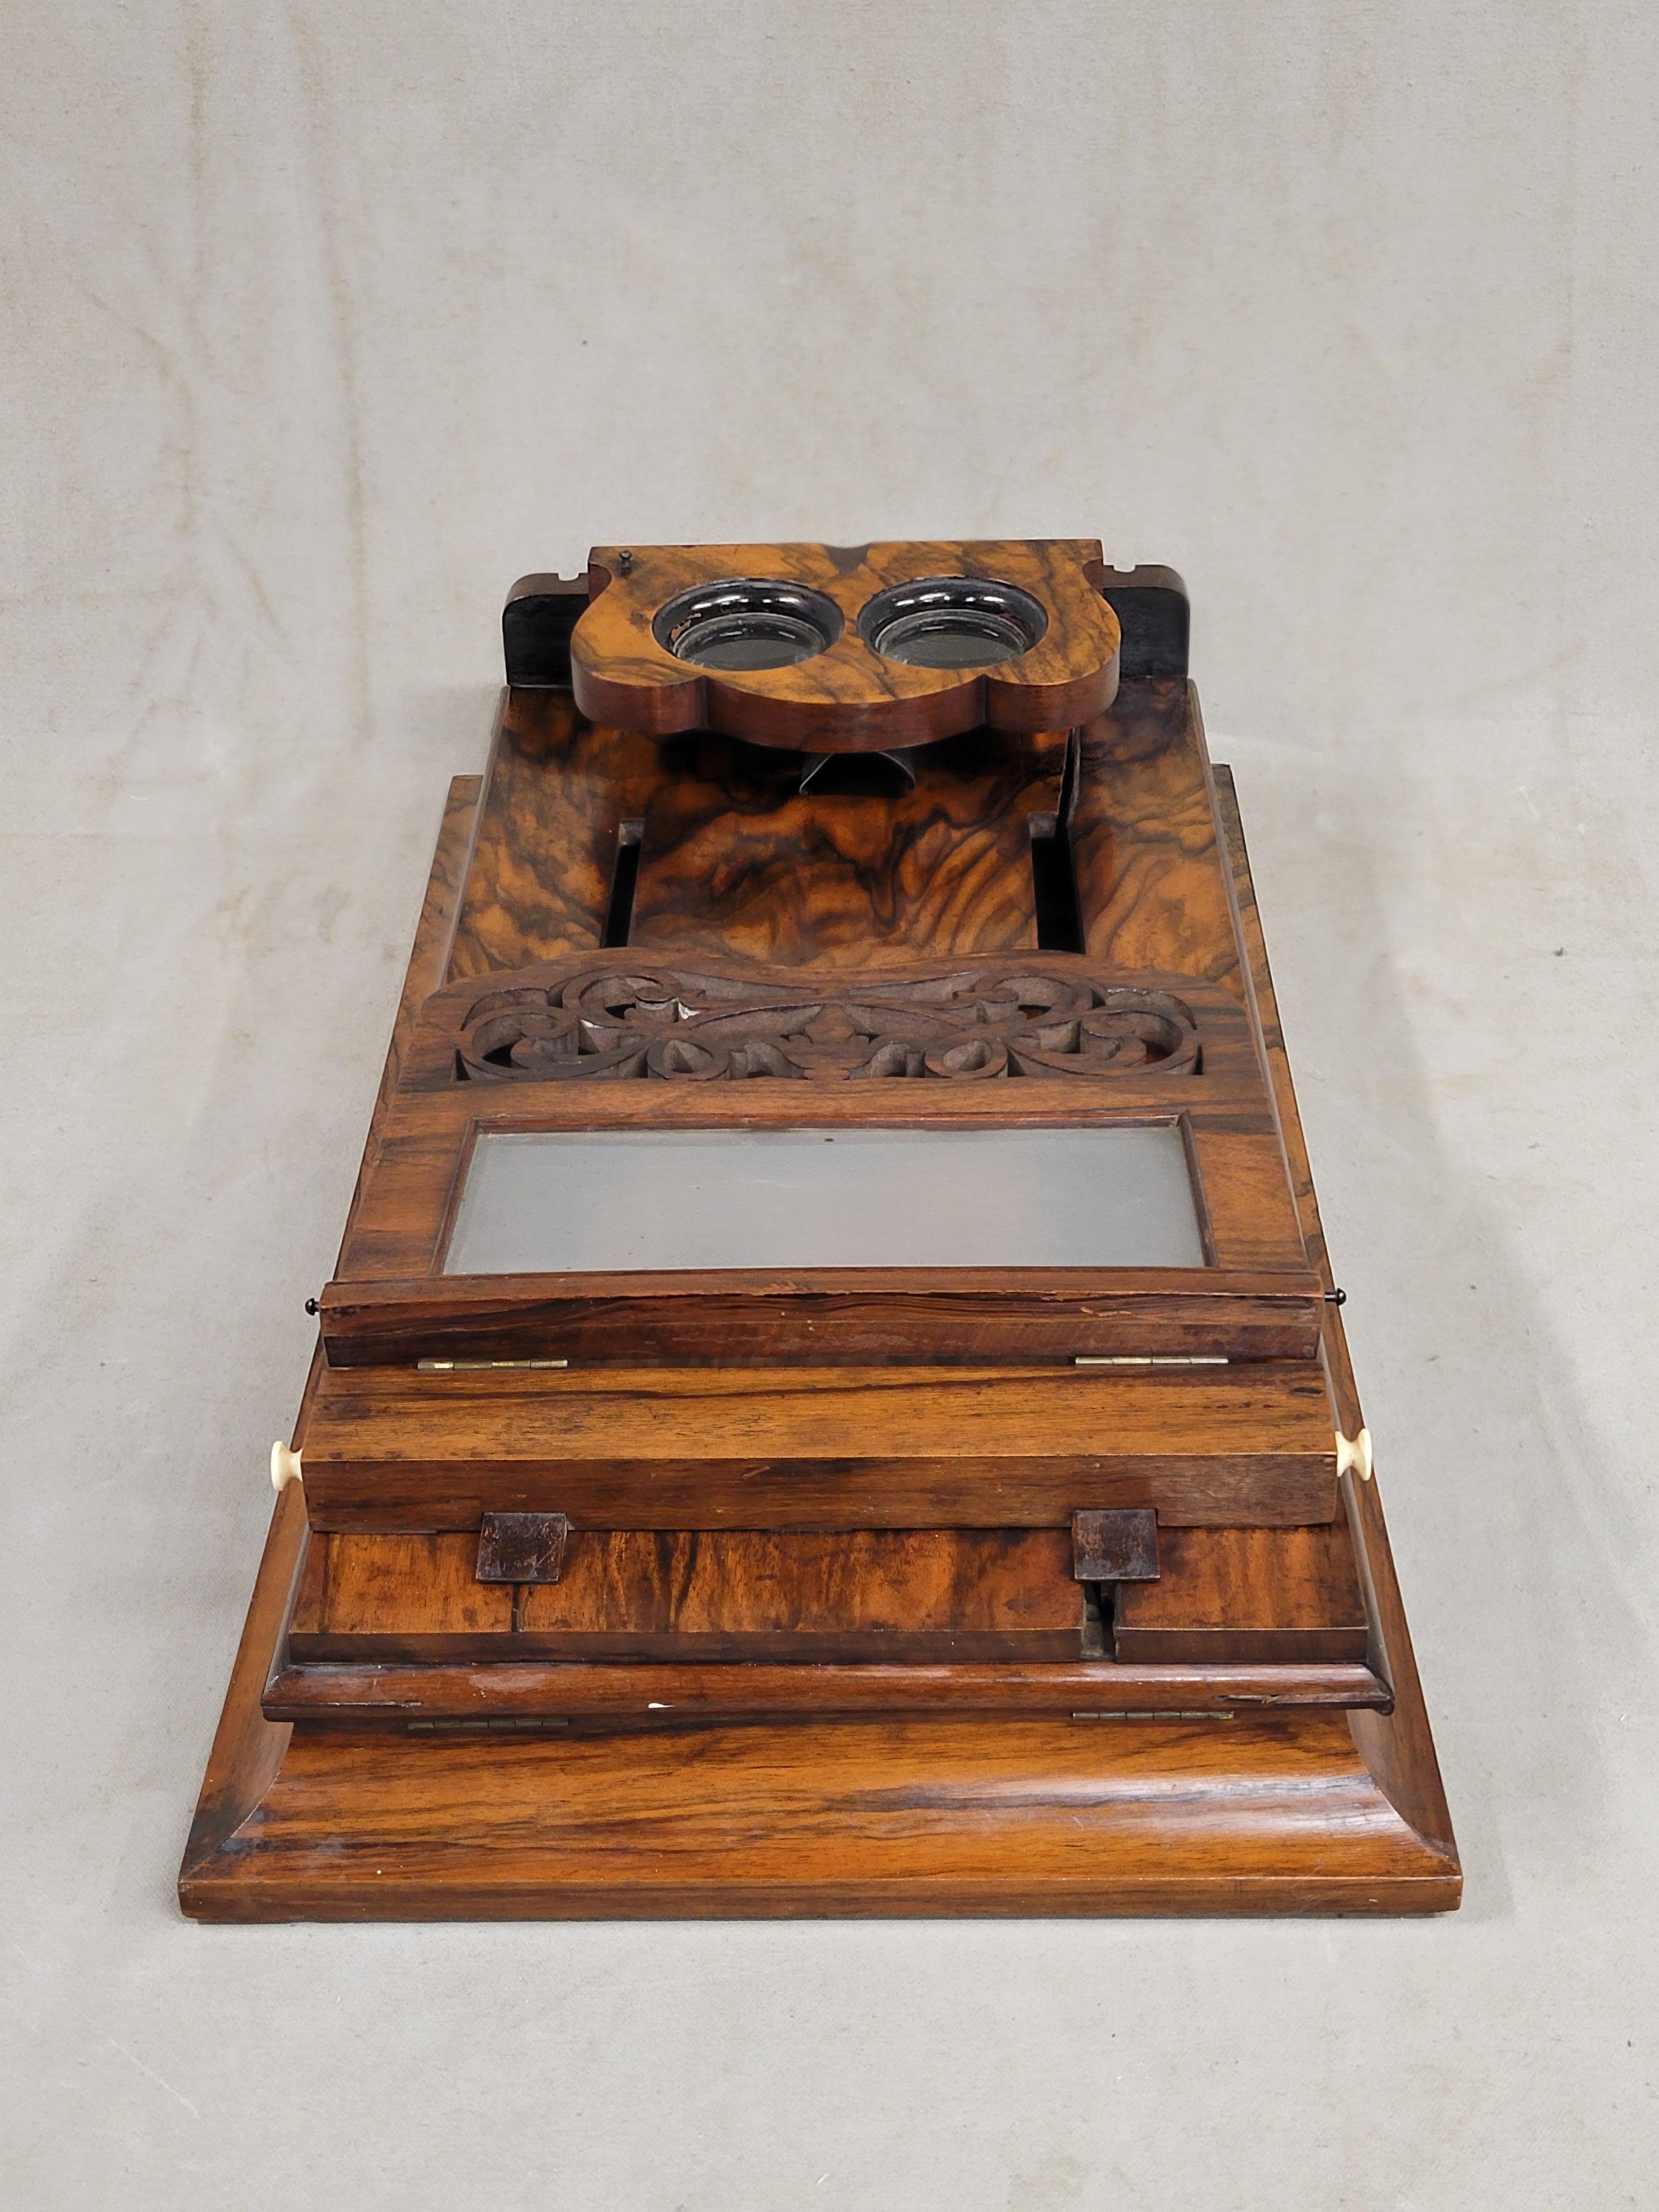 Antique Rosewood Folding Stereoscope Viewer - Philadelphia Gallery of Fine Arts For Sale 1